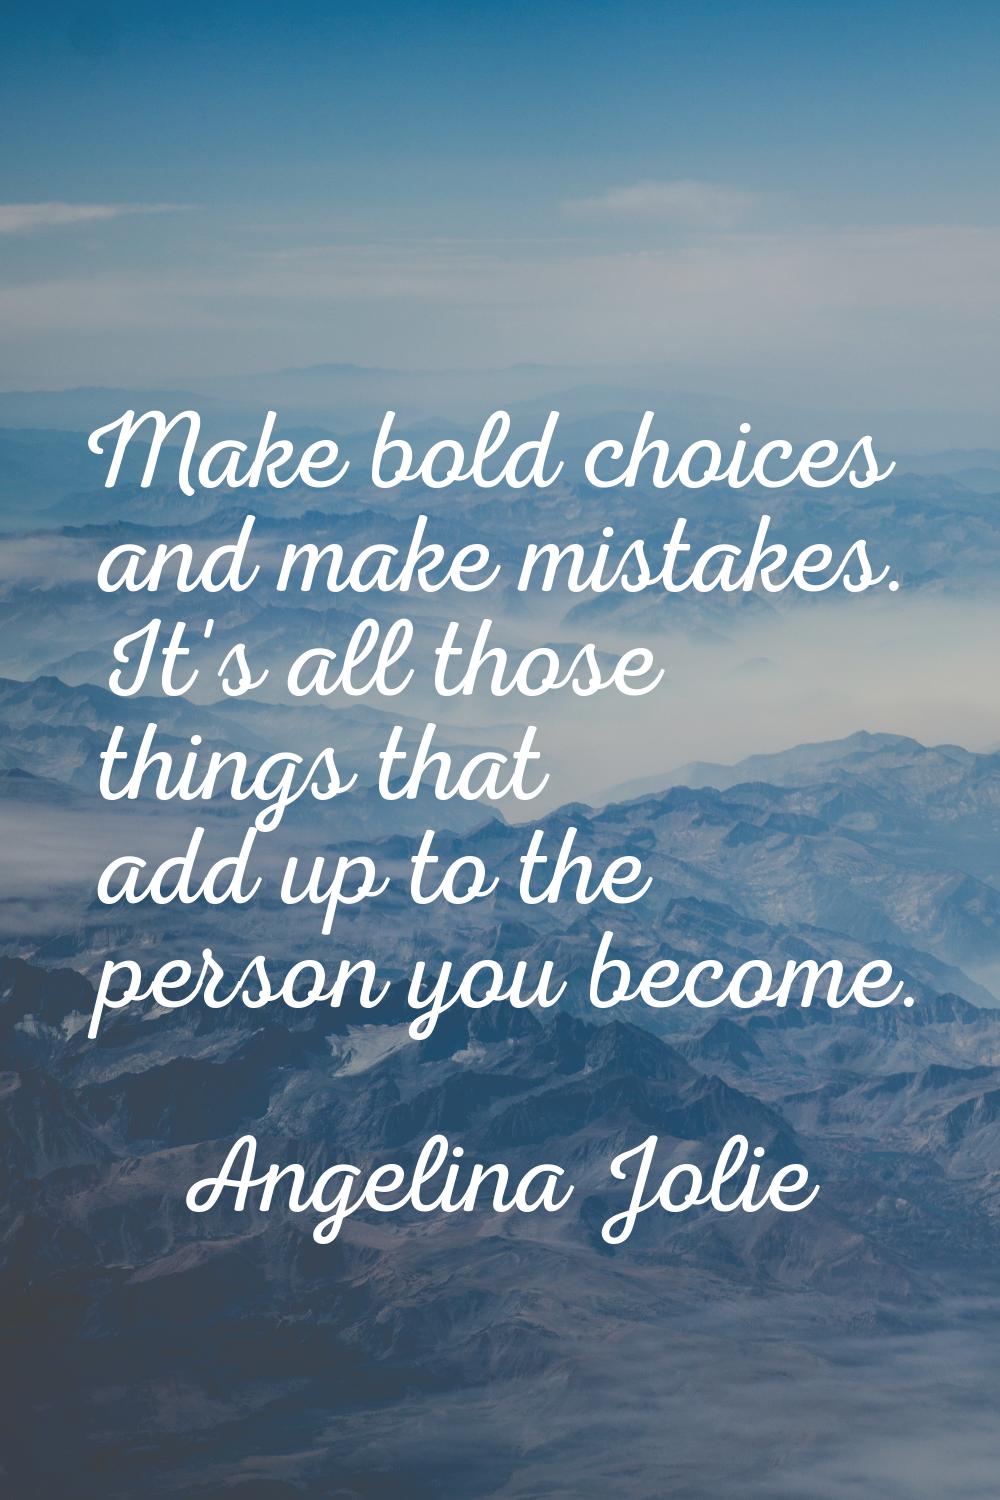 Make bold choices and make mistakes. It's all those things that add up to the person you become.